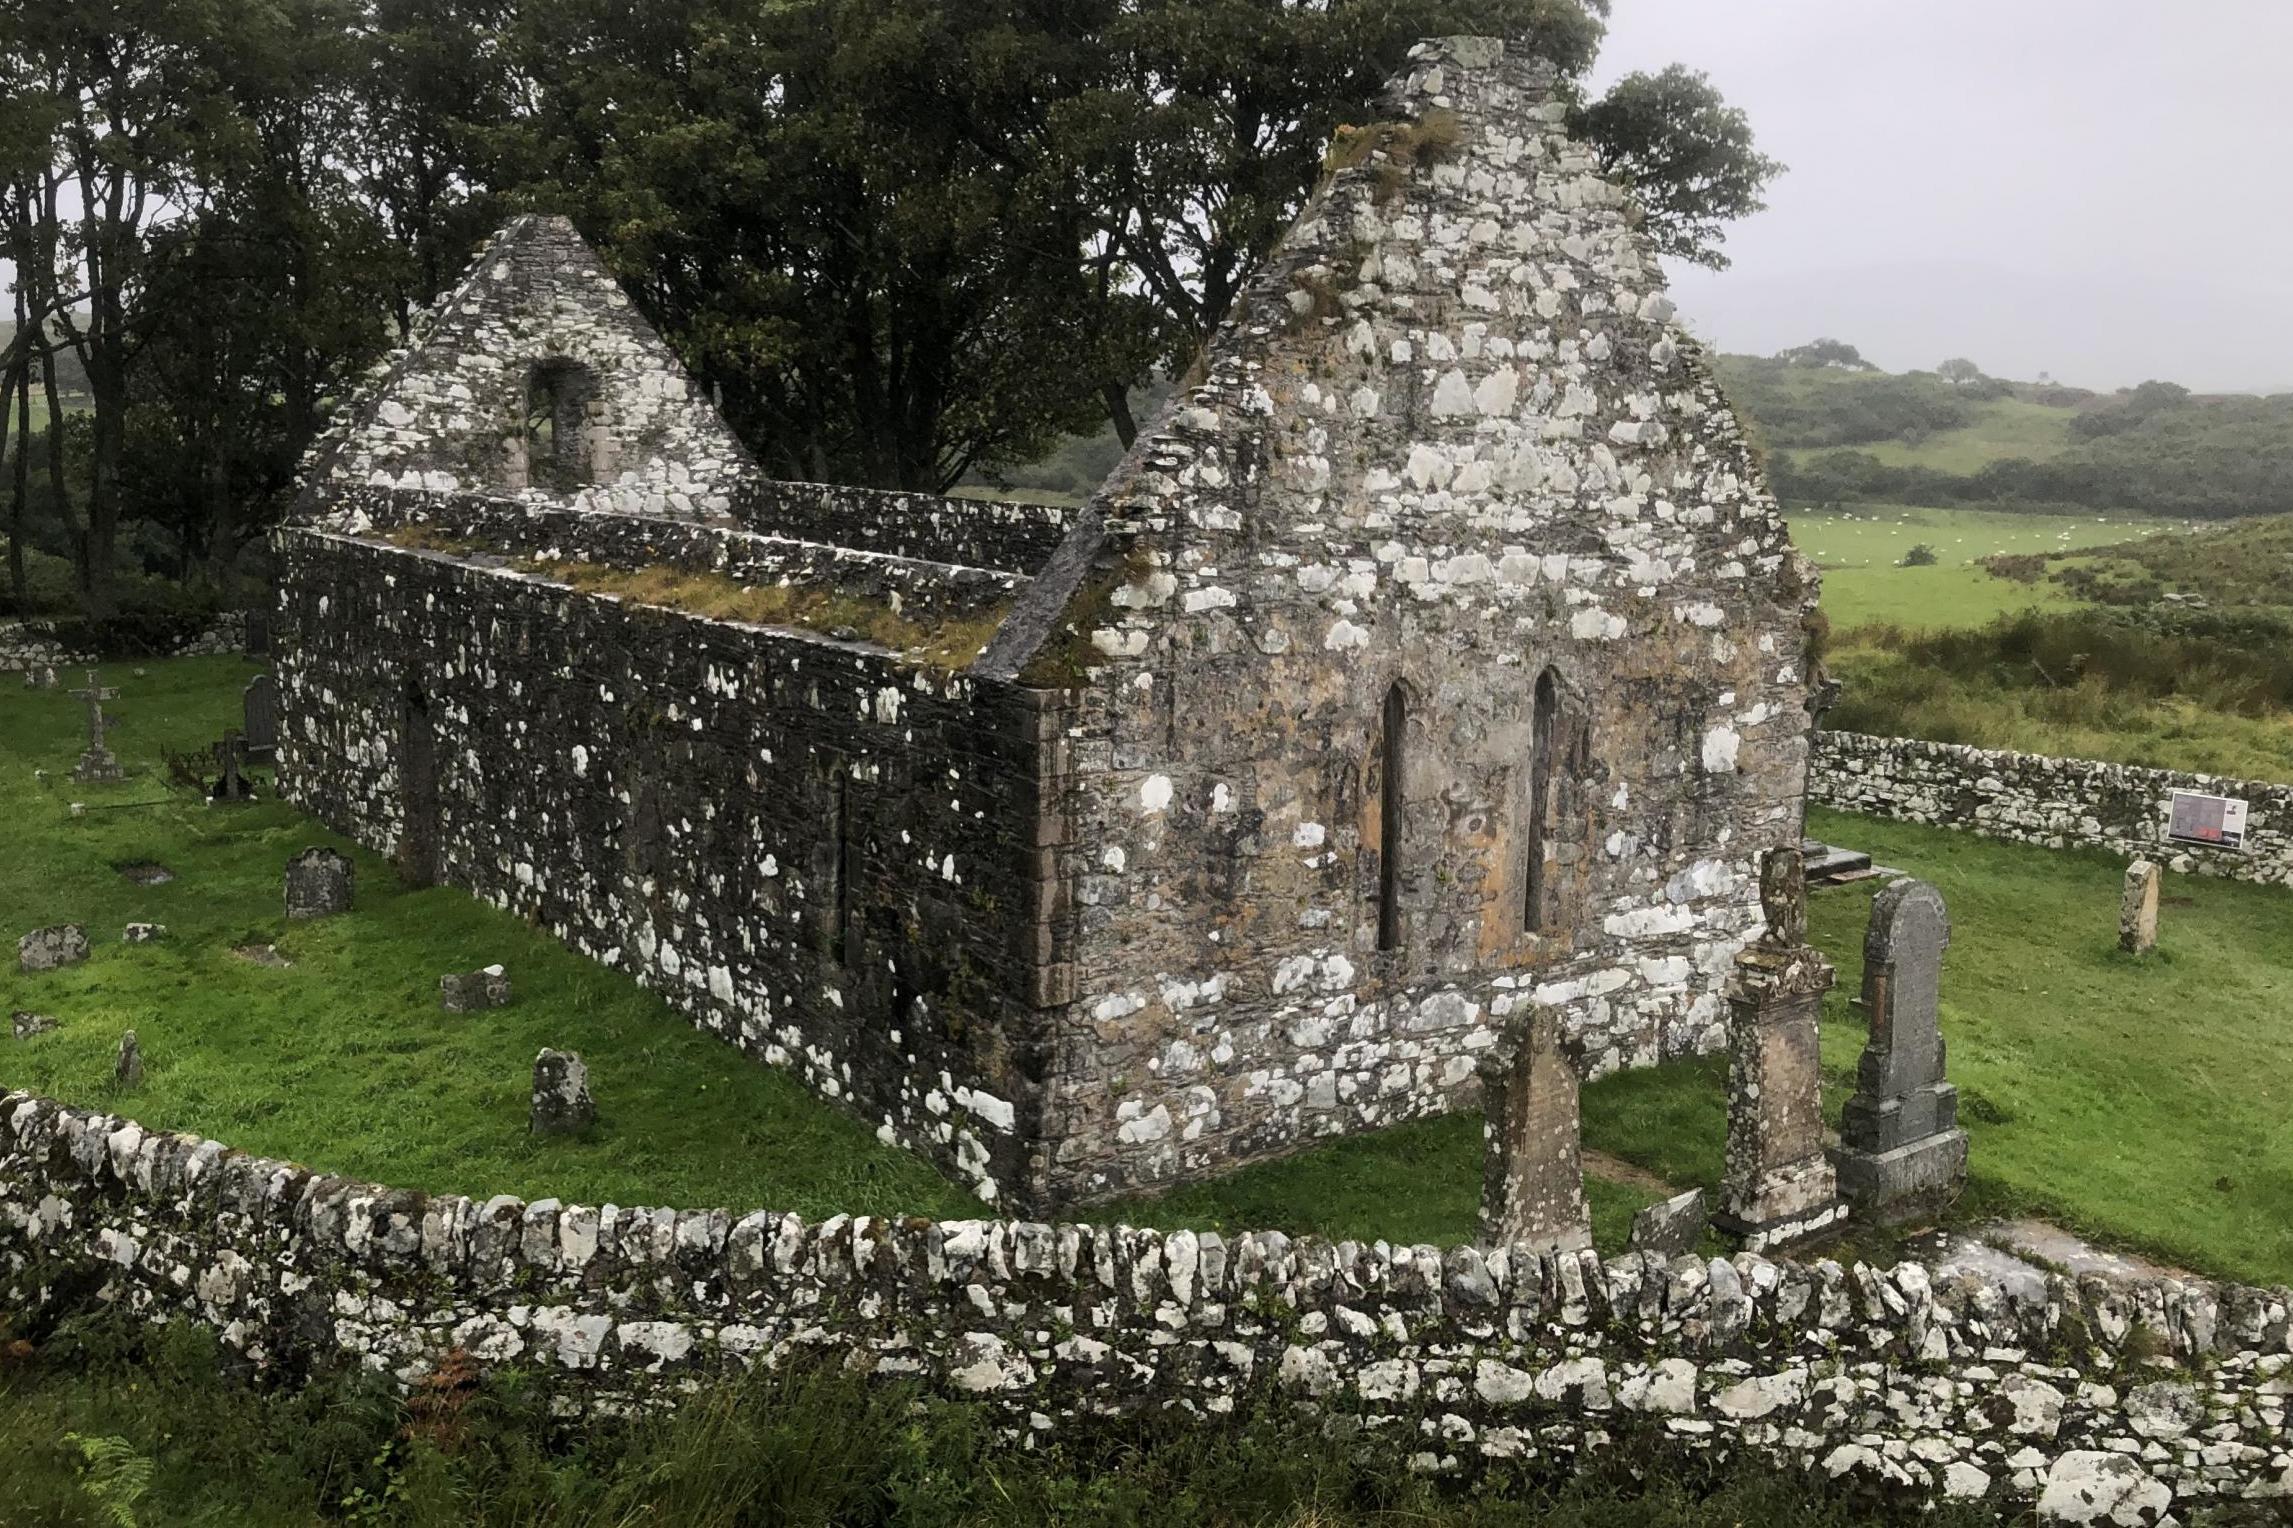 Bleak prospect? This ruined chapel at Kildalton is a testament to hope